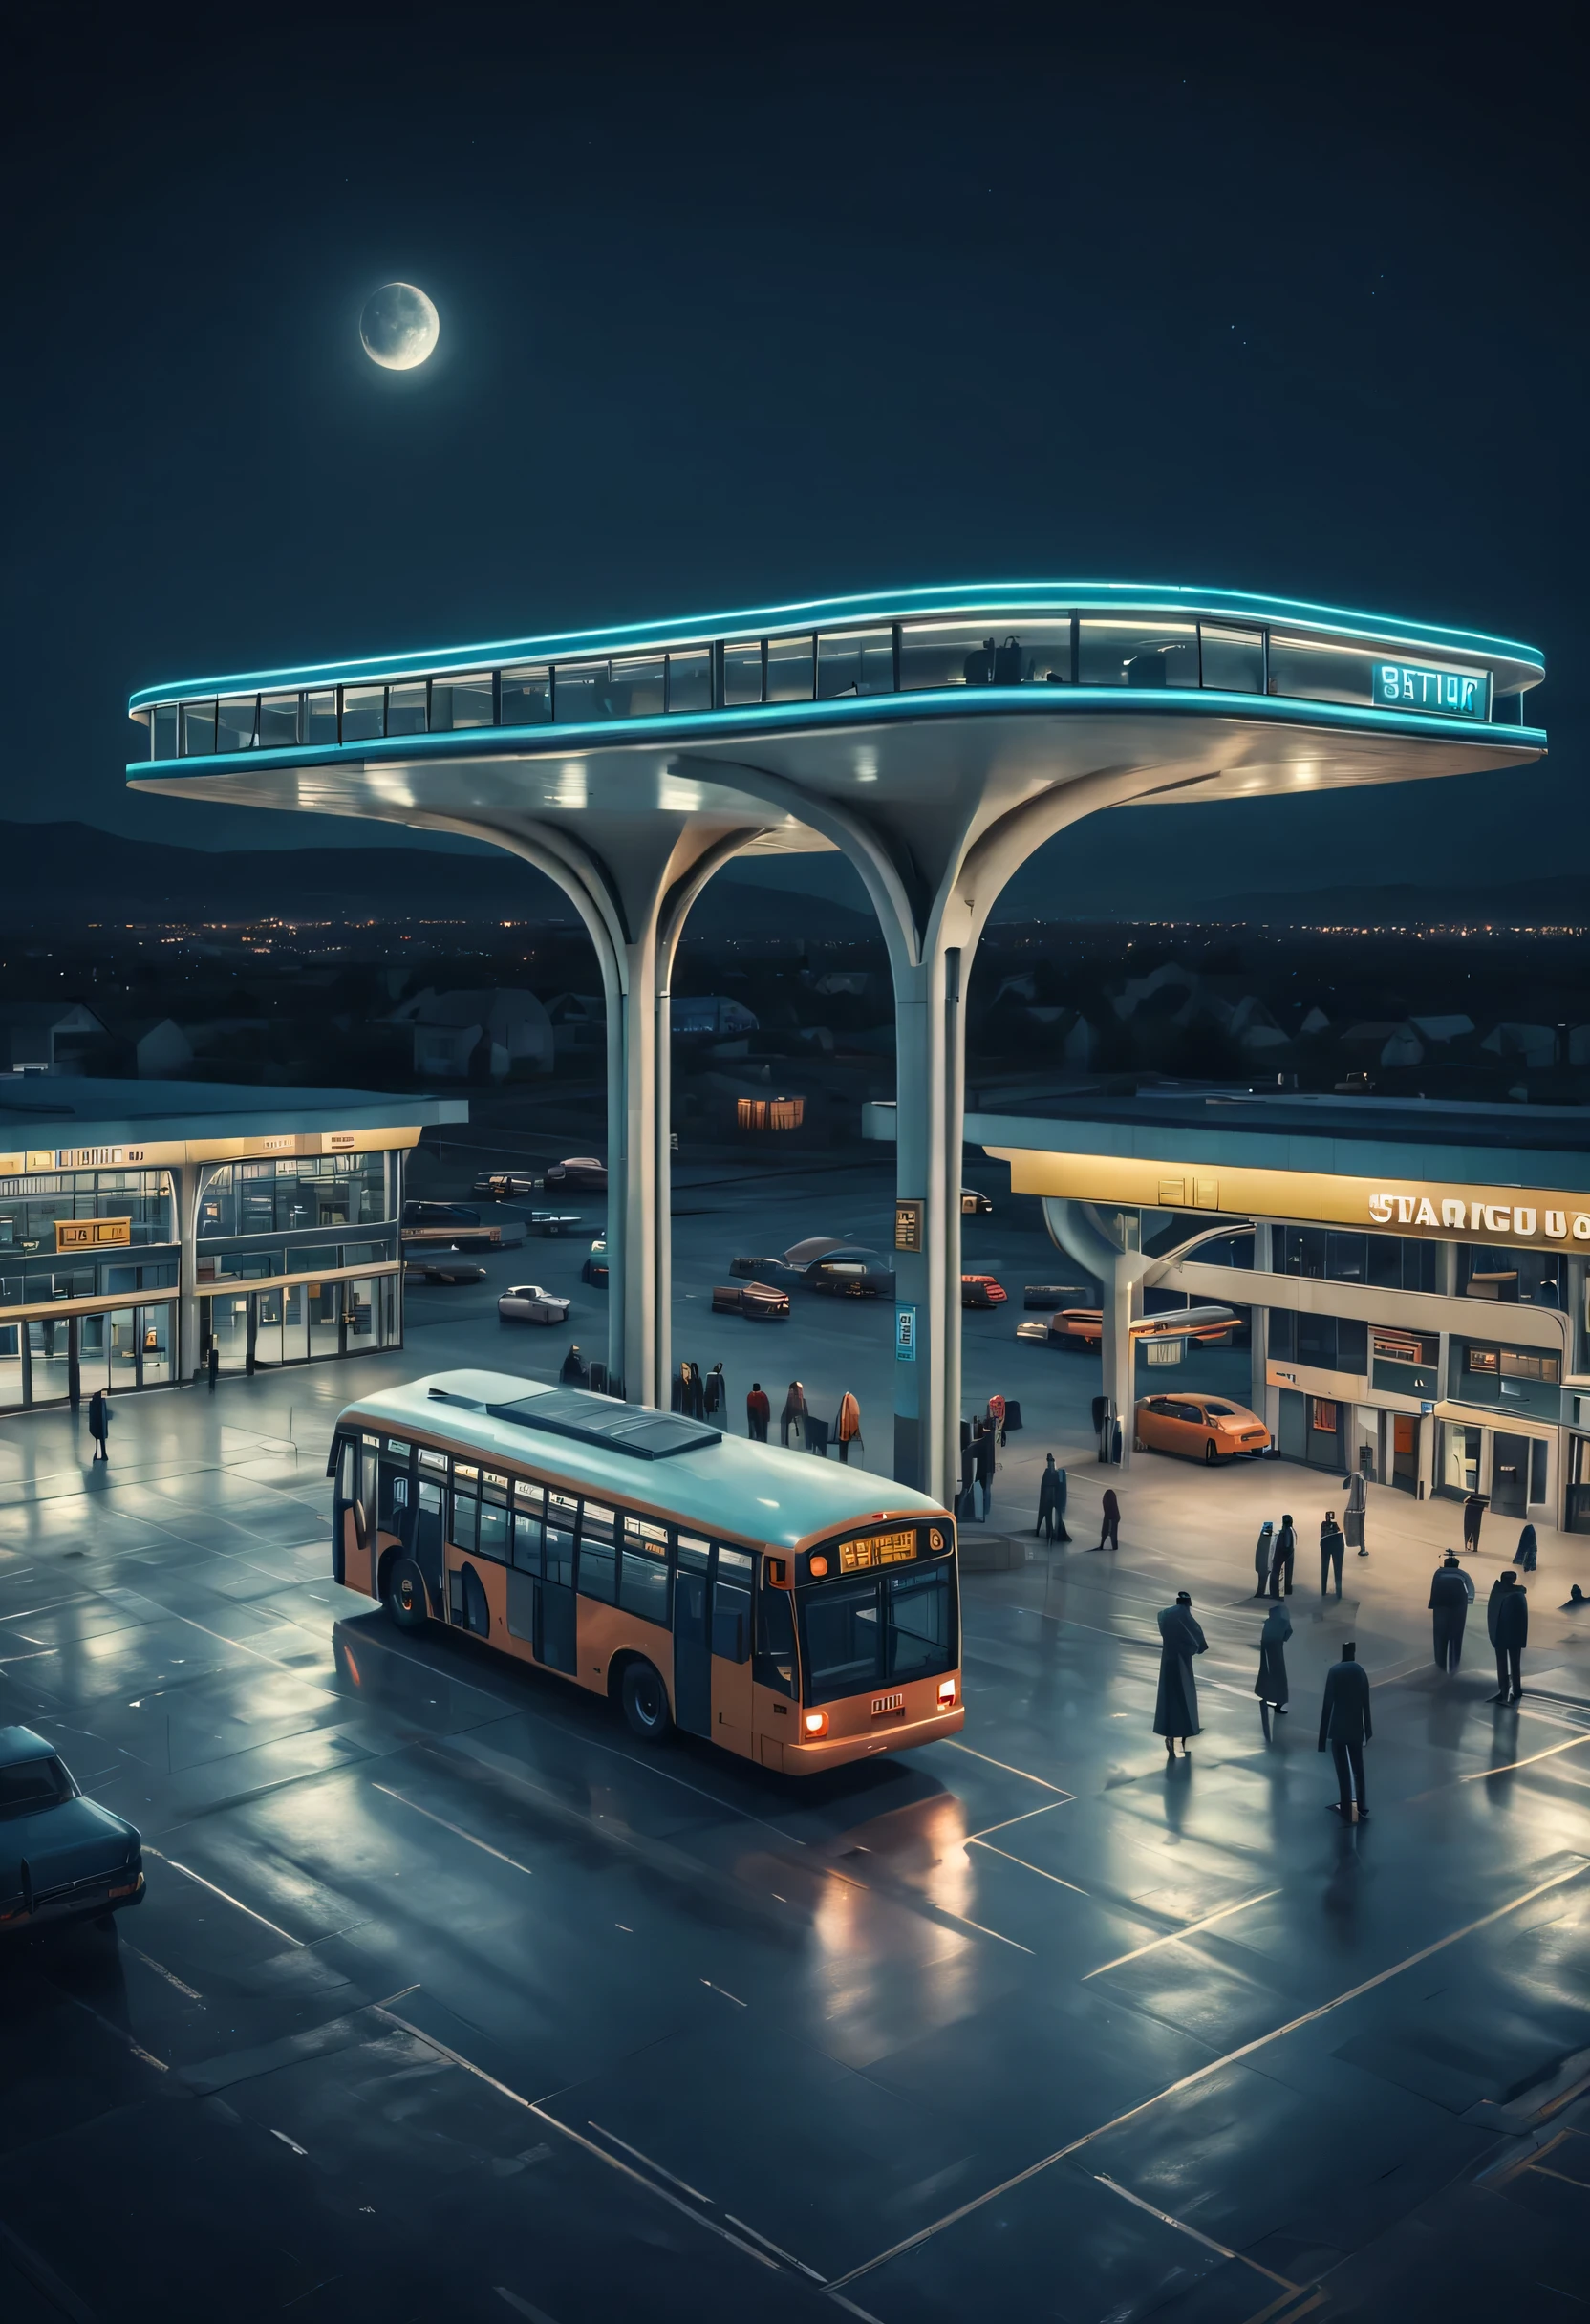 Aerial style, street photography style, ESTILO RETROFUTURISMO, Beautiful and meticulous，Evening character, The bus station building is located in a quiet town, real picture, 4k, with an original style，stop，people waiting for bus，